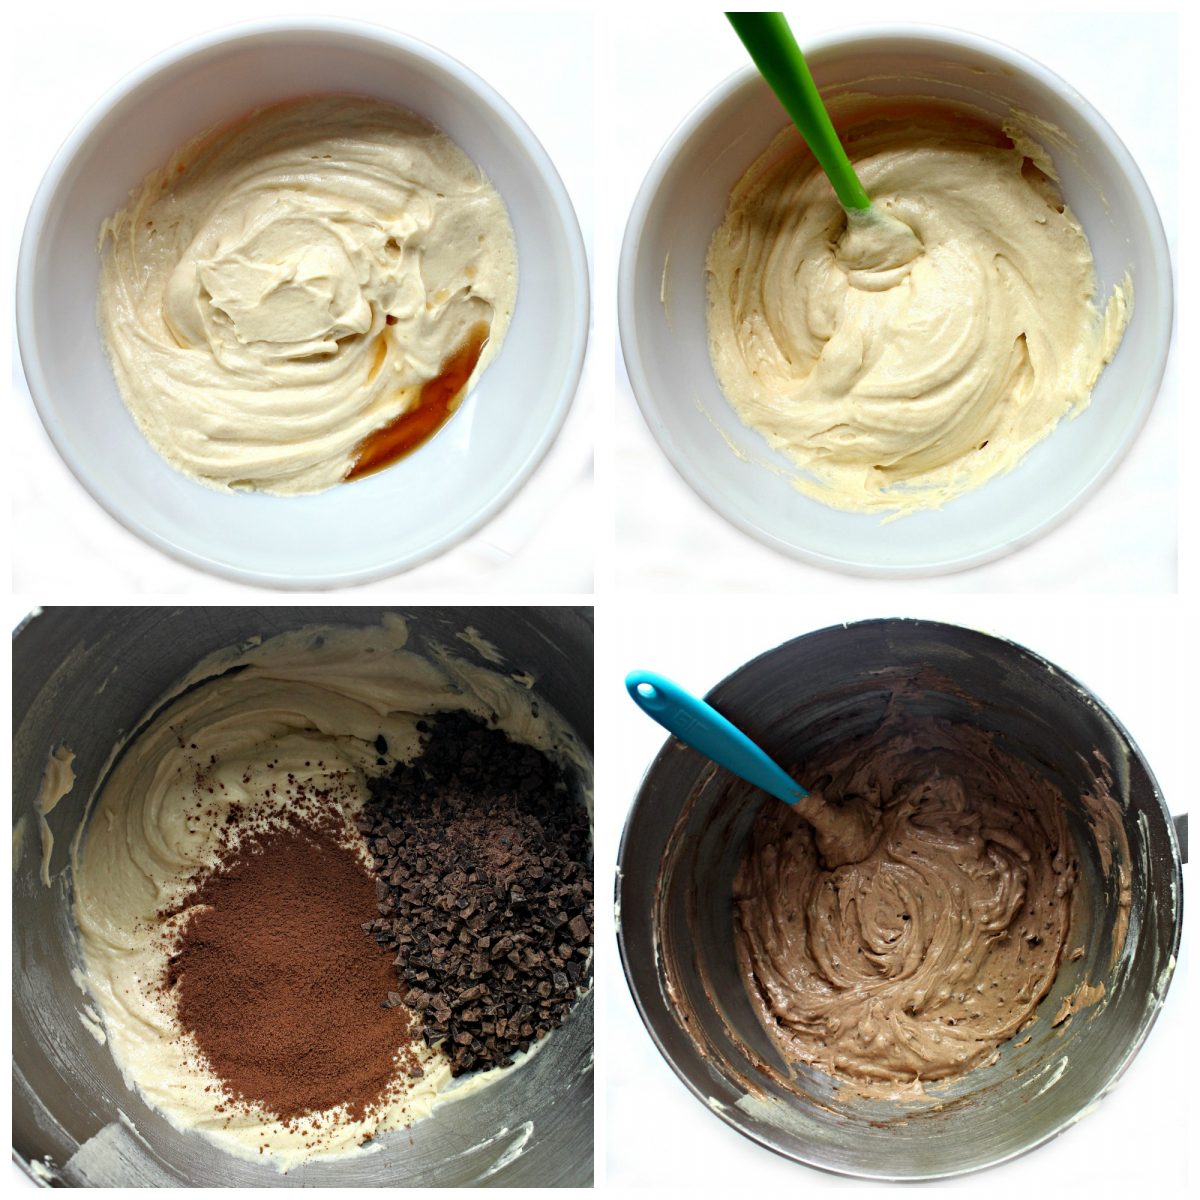 Process collage showing batter with vanilla added and batter with cocoa and chocolate added.